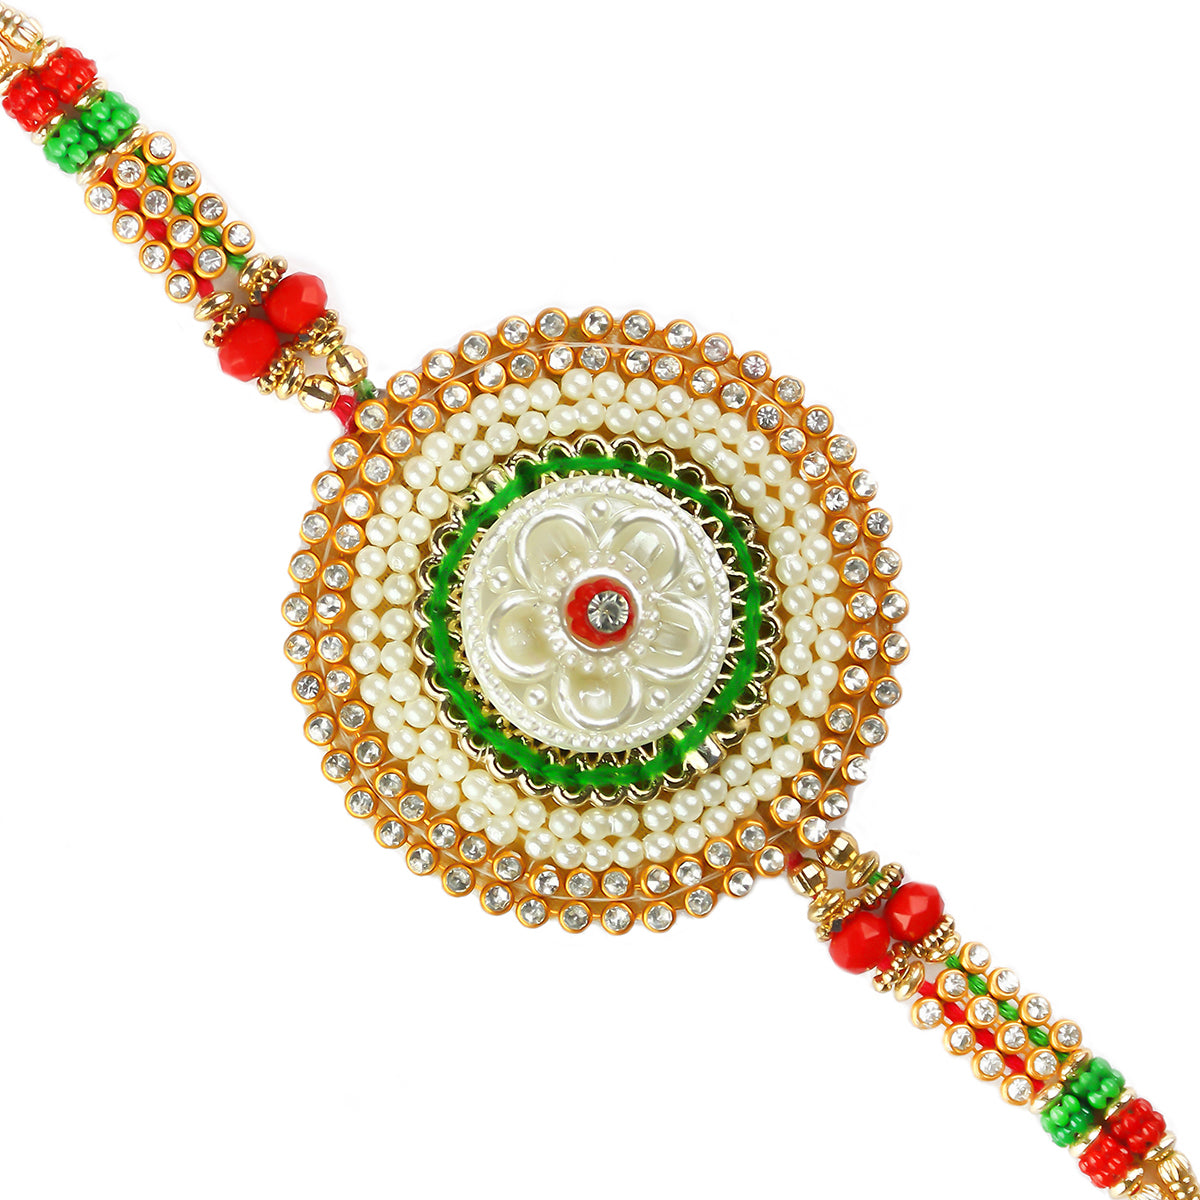 Designer Rakhi with Ferrero Rocher (16 pcs) and Roli Chawal Pack, Best Wishes Greeting Card 1